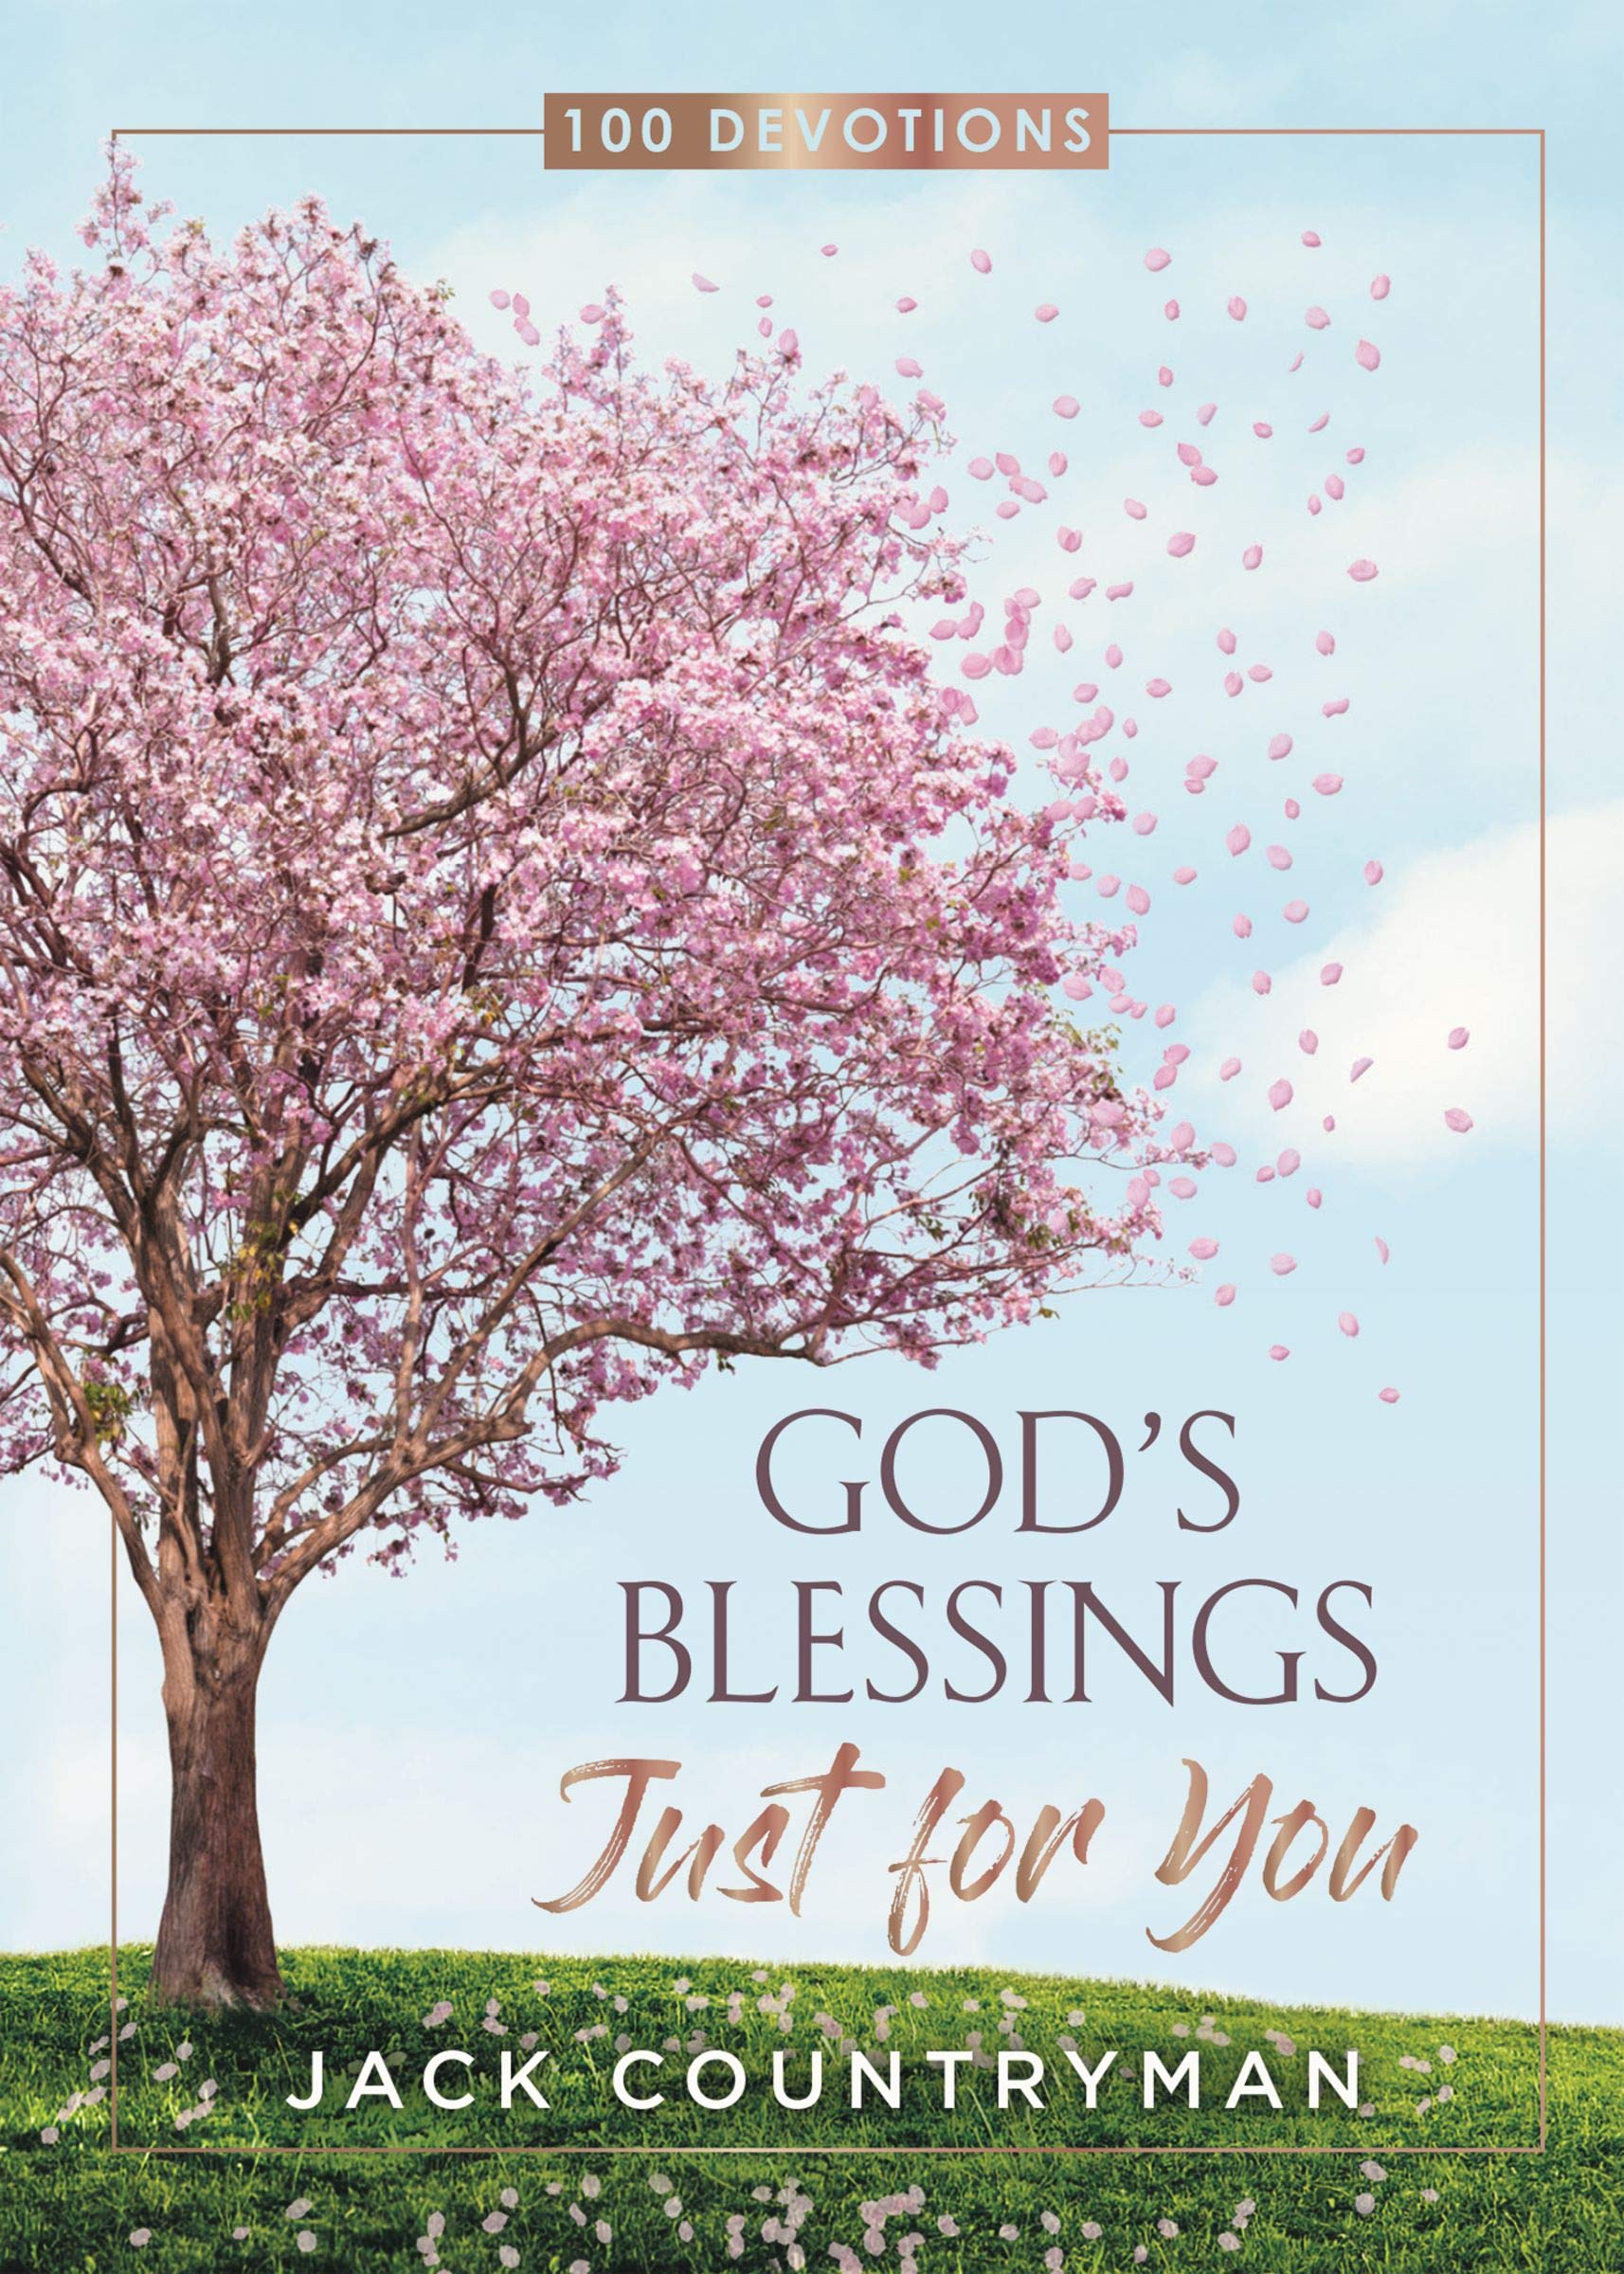 ROCKONLINE | God's Blessings Just for You: 100 Devotions (hardcover) | Devotional | Scriptures | Thomas Nelson | New Creation Church | NCC | Joseph Prince | ROCK Bookshop | ROCK Bookstore | The Star Vista | Free delivery for Singapore Orders above $50.